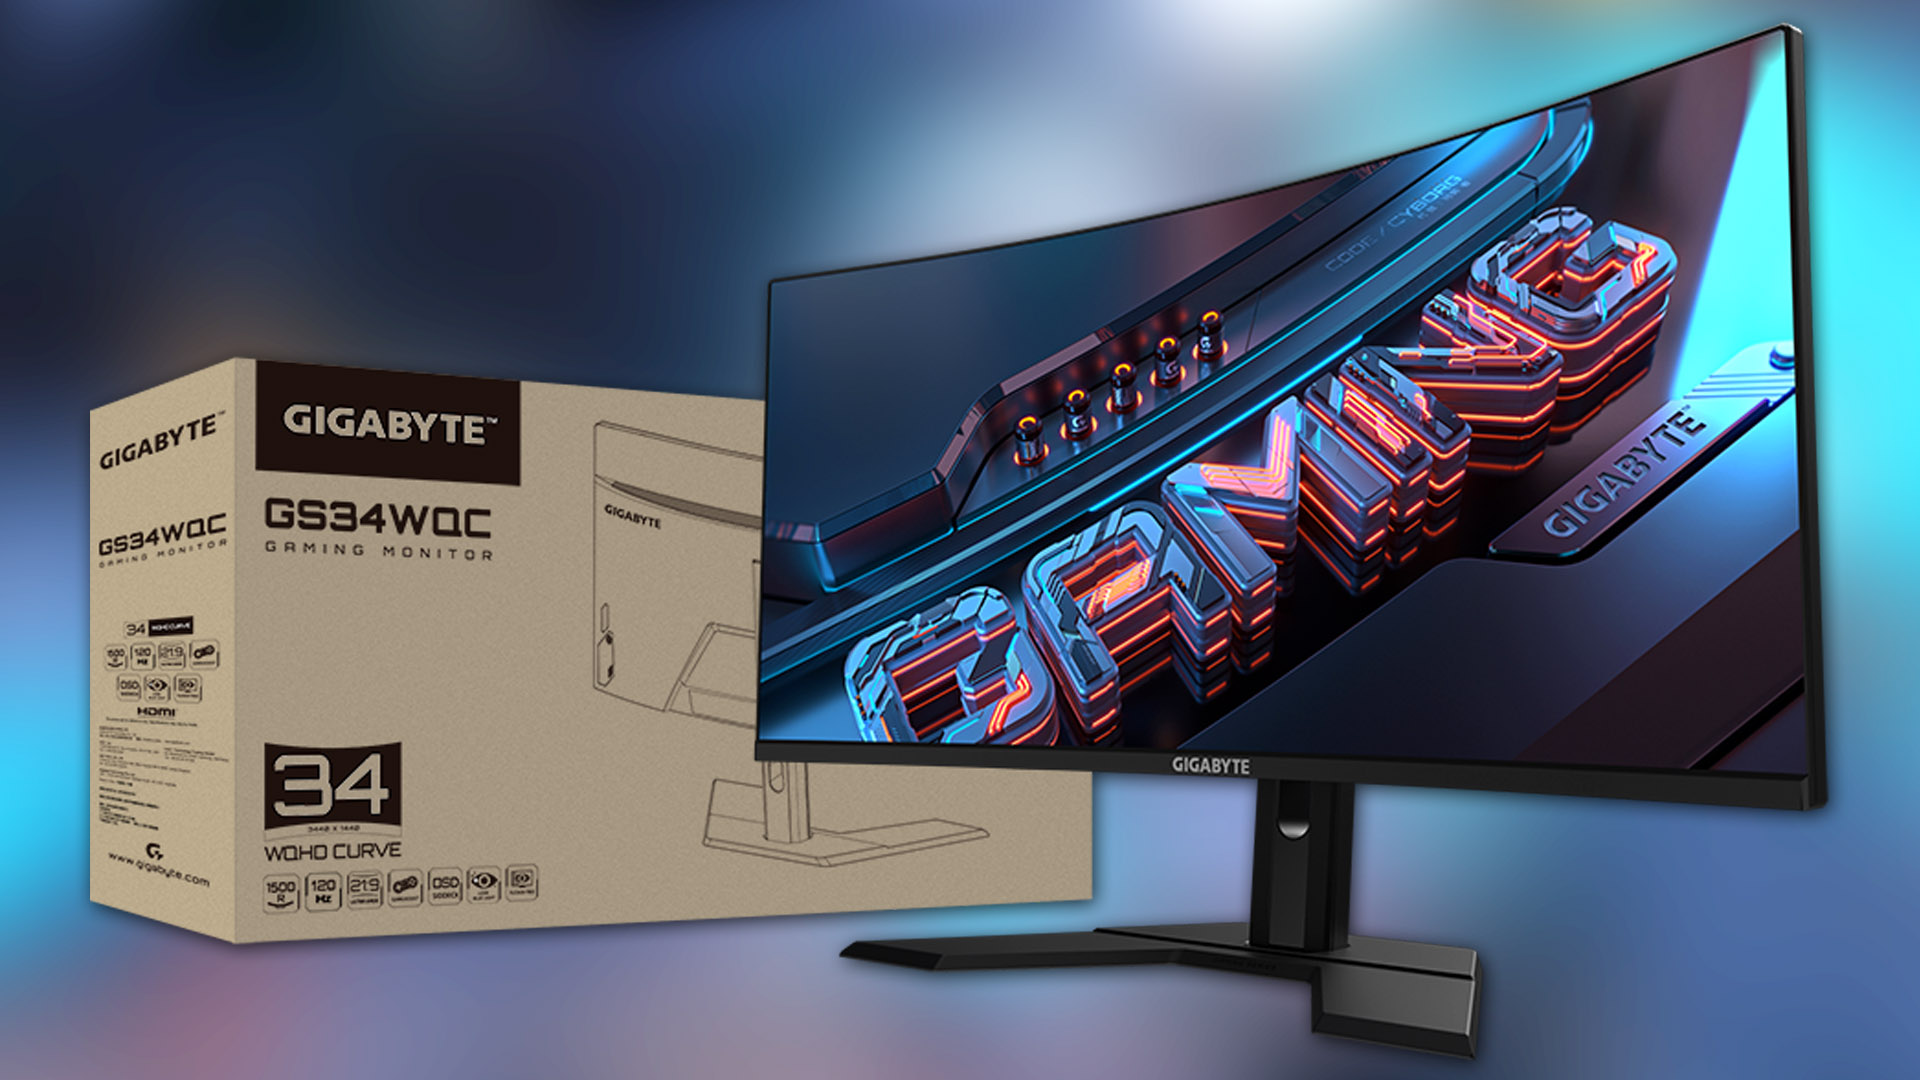 Gigabyte’s 34-inch ultrawide monitor is on sale for just $300